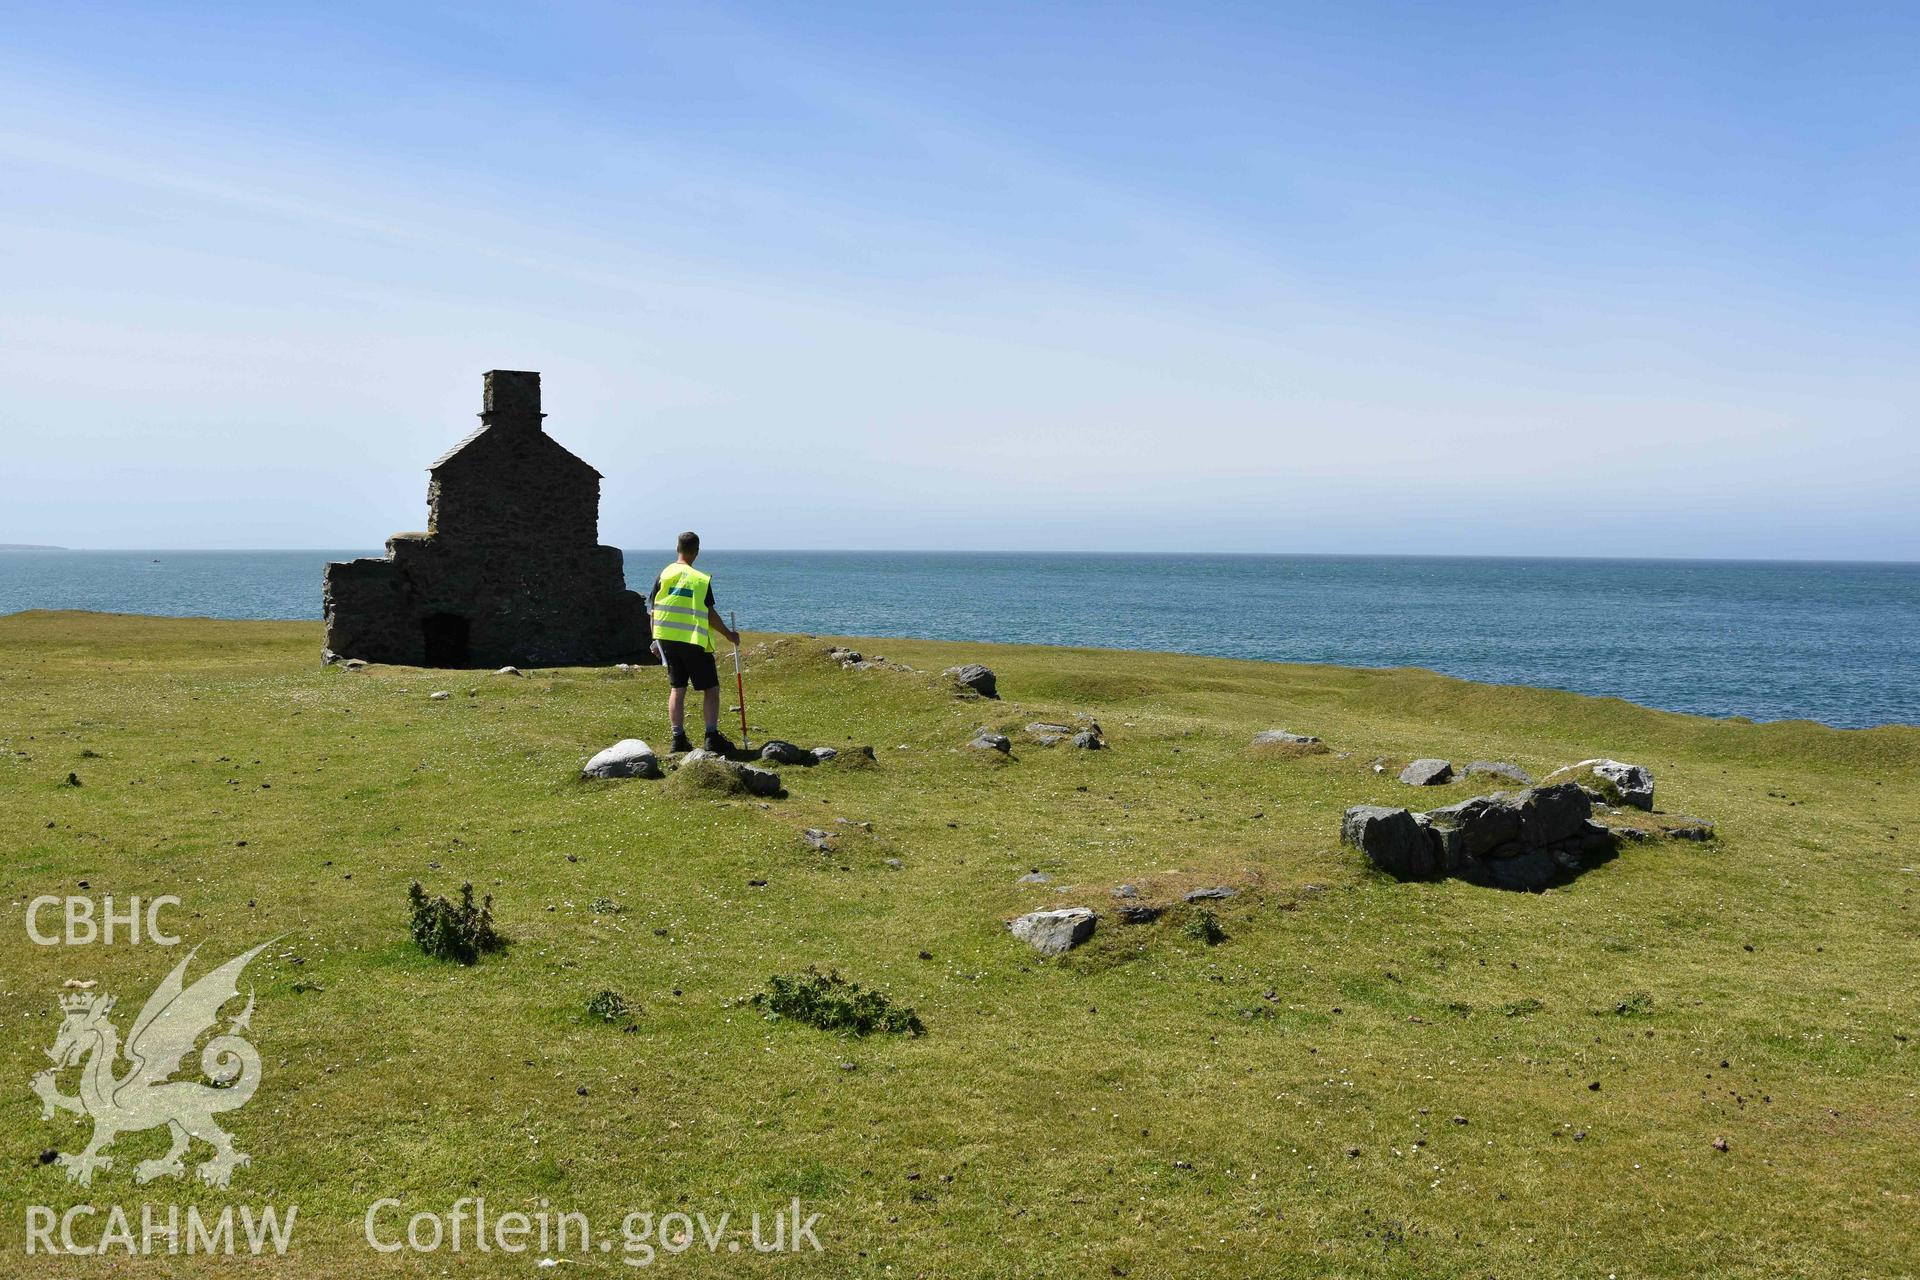 Custom Officer’s House, Porth Ysgaden. View from the northeast. Photographed by Louise Barker of RCAHMW, 9th June 2017. Produced with EU funds through the Ireland Wales Co-operation Programme 2014-2023. All material made freely available through the Open Government Licence.